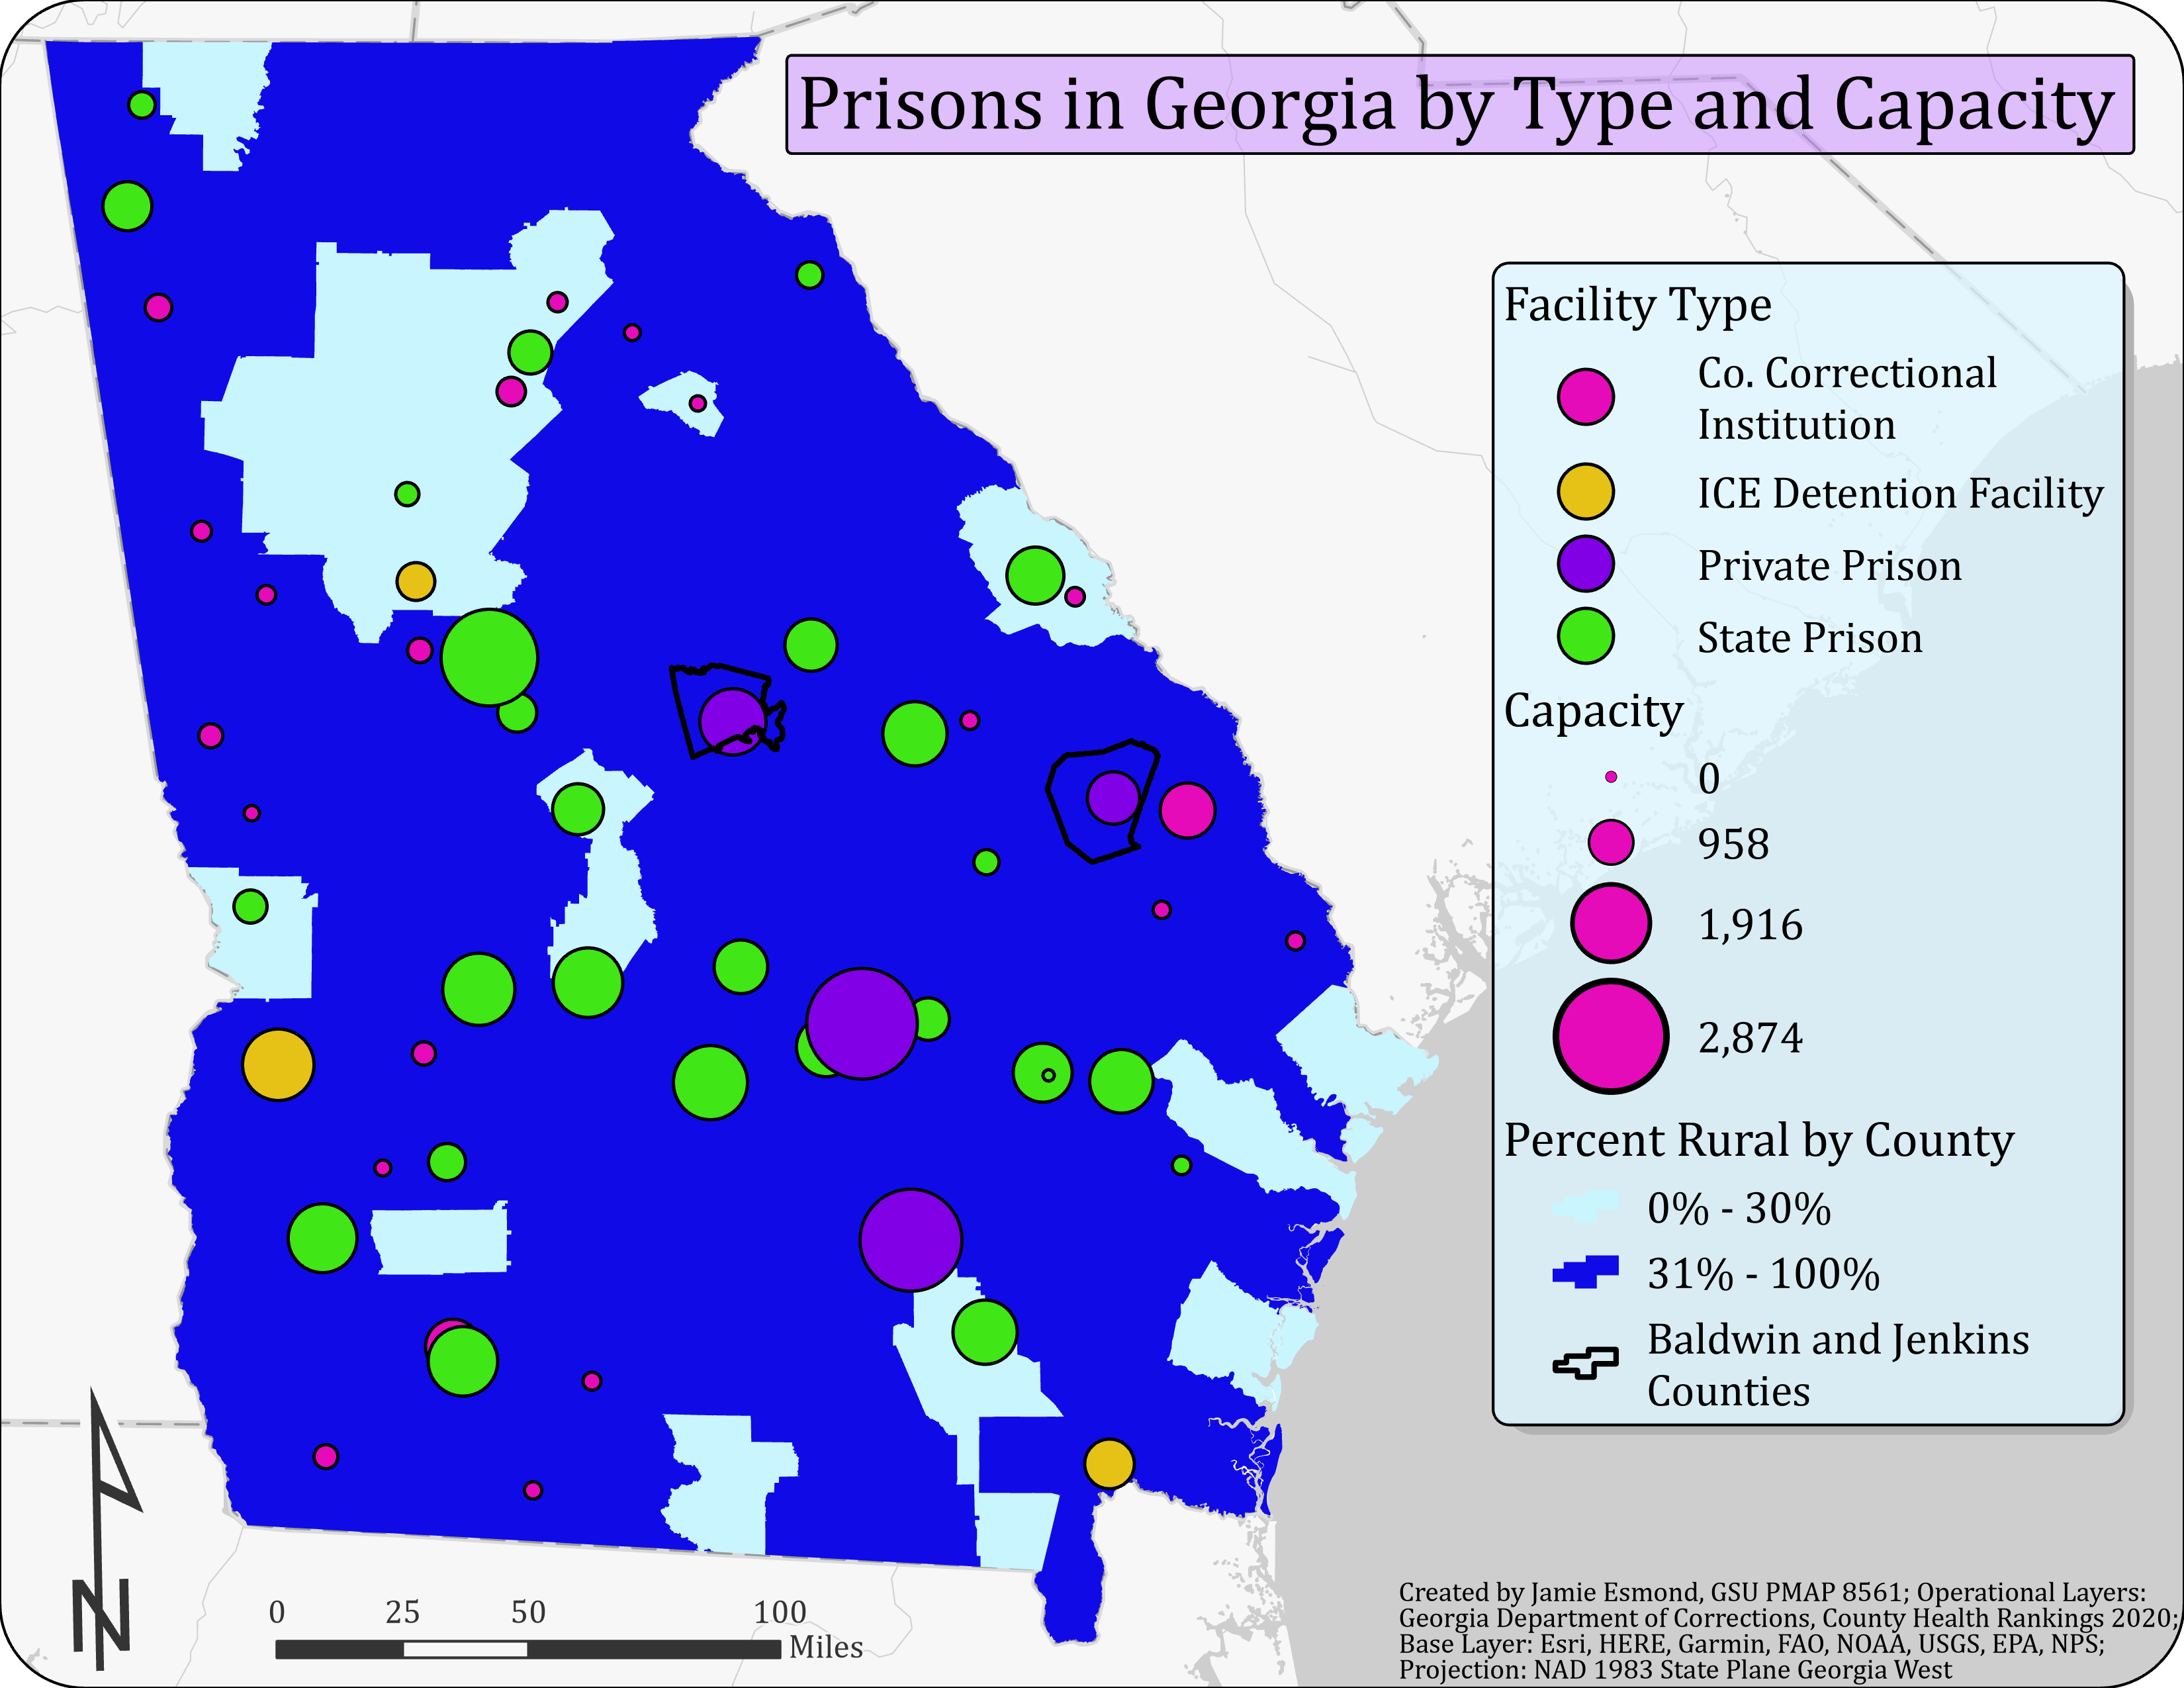 A map of Georgia showing the capacity and location of prisons, color coded to indicate type of facility.